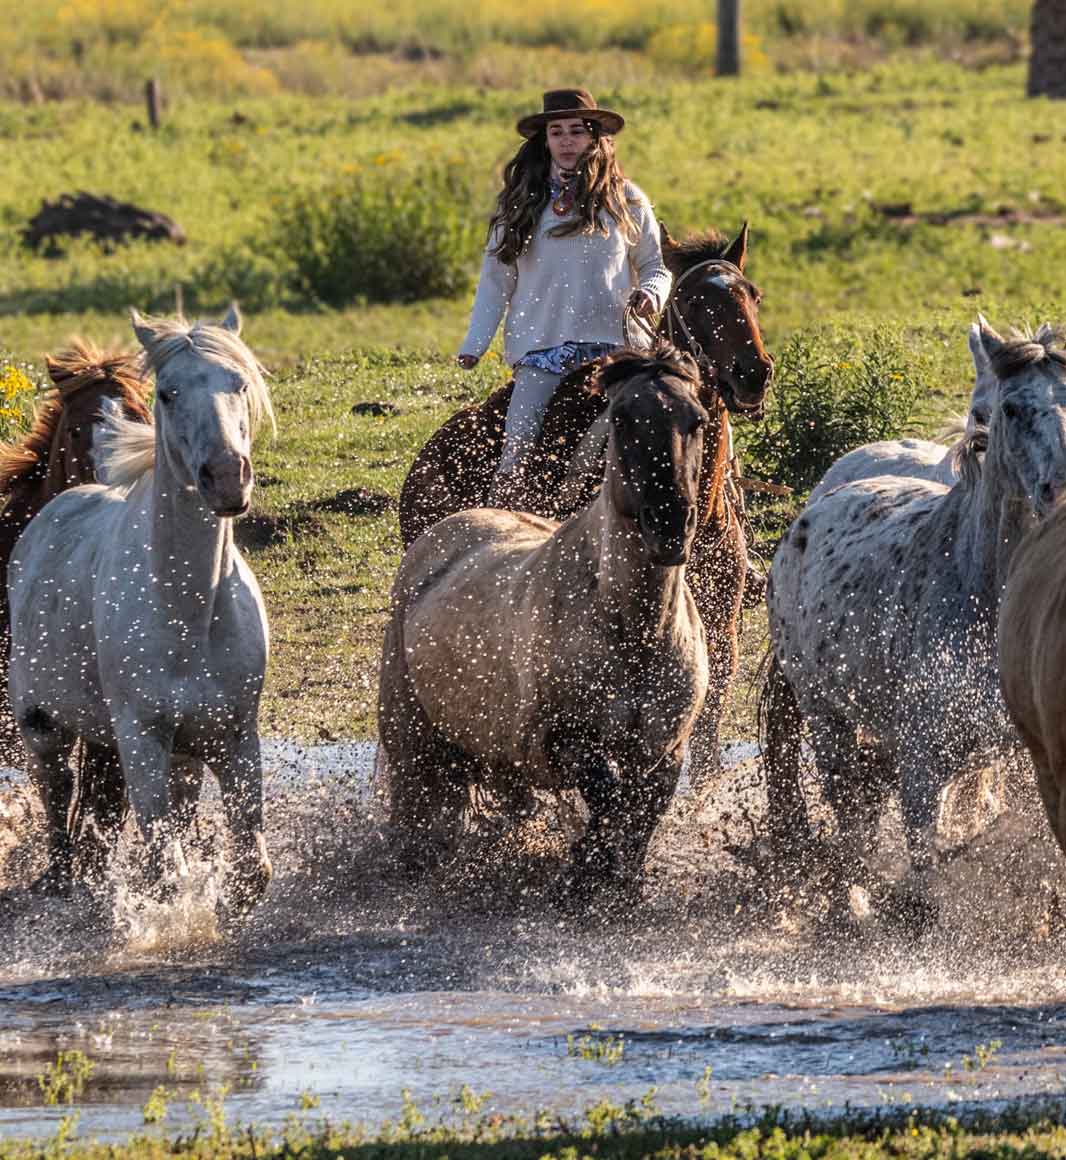 Horse riding in gaucho country in Argentina